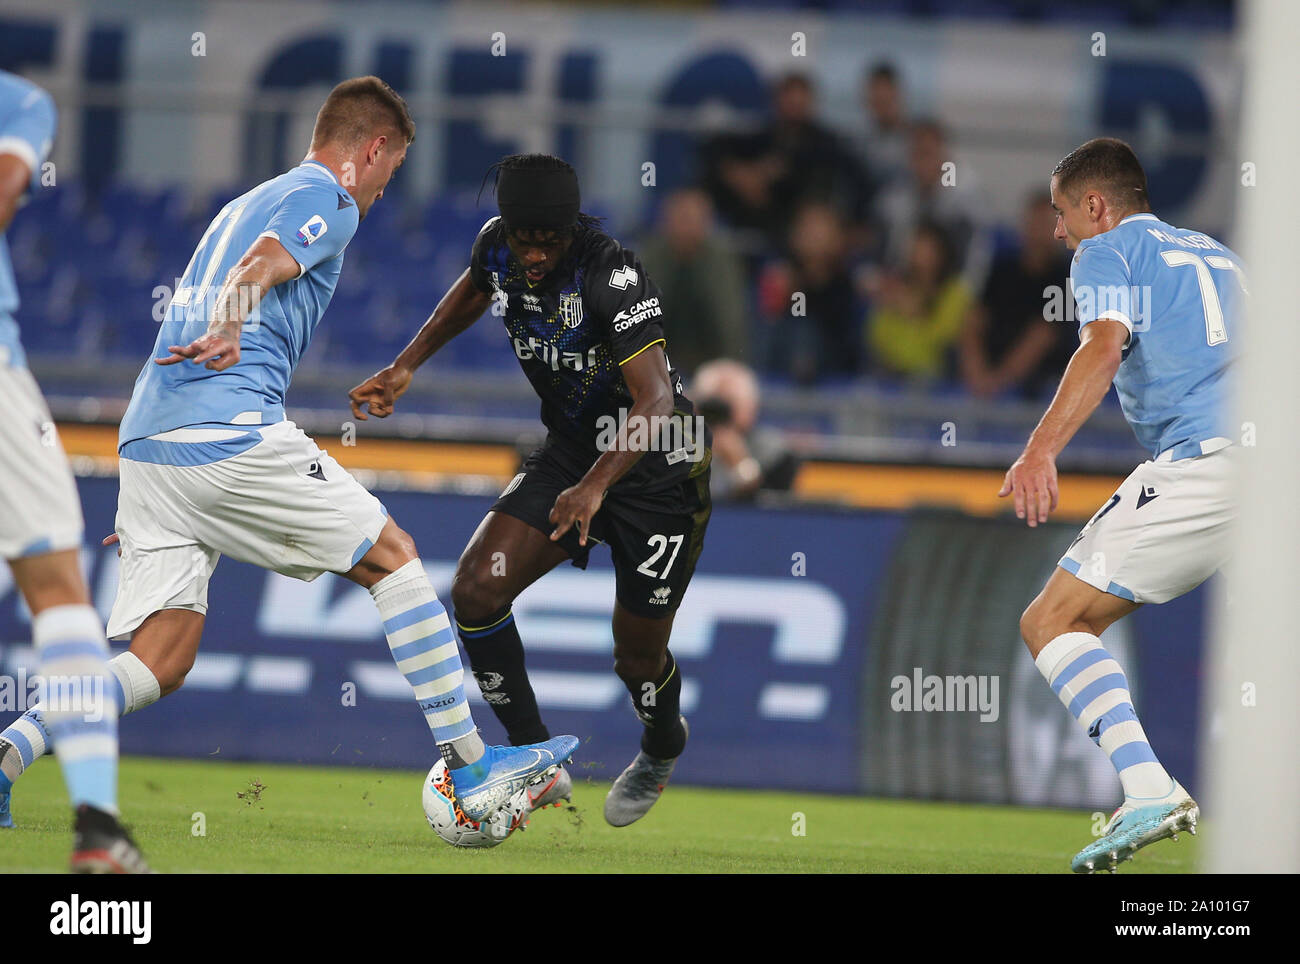 Rome, Italy. 22nd Sep, 2019. Rome, Italy - September 22, 2019: GERVINHO (PARMA) in action during the Italian Serie A soccer match between SS LAZIO and PARMA, at Olympic Stadium in Rome. Credit: Independent Photo Agency/Alamy Live News Stock Photo